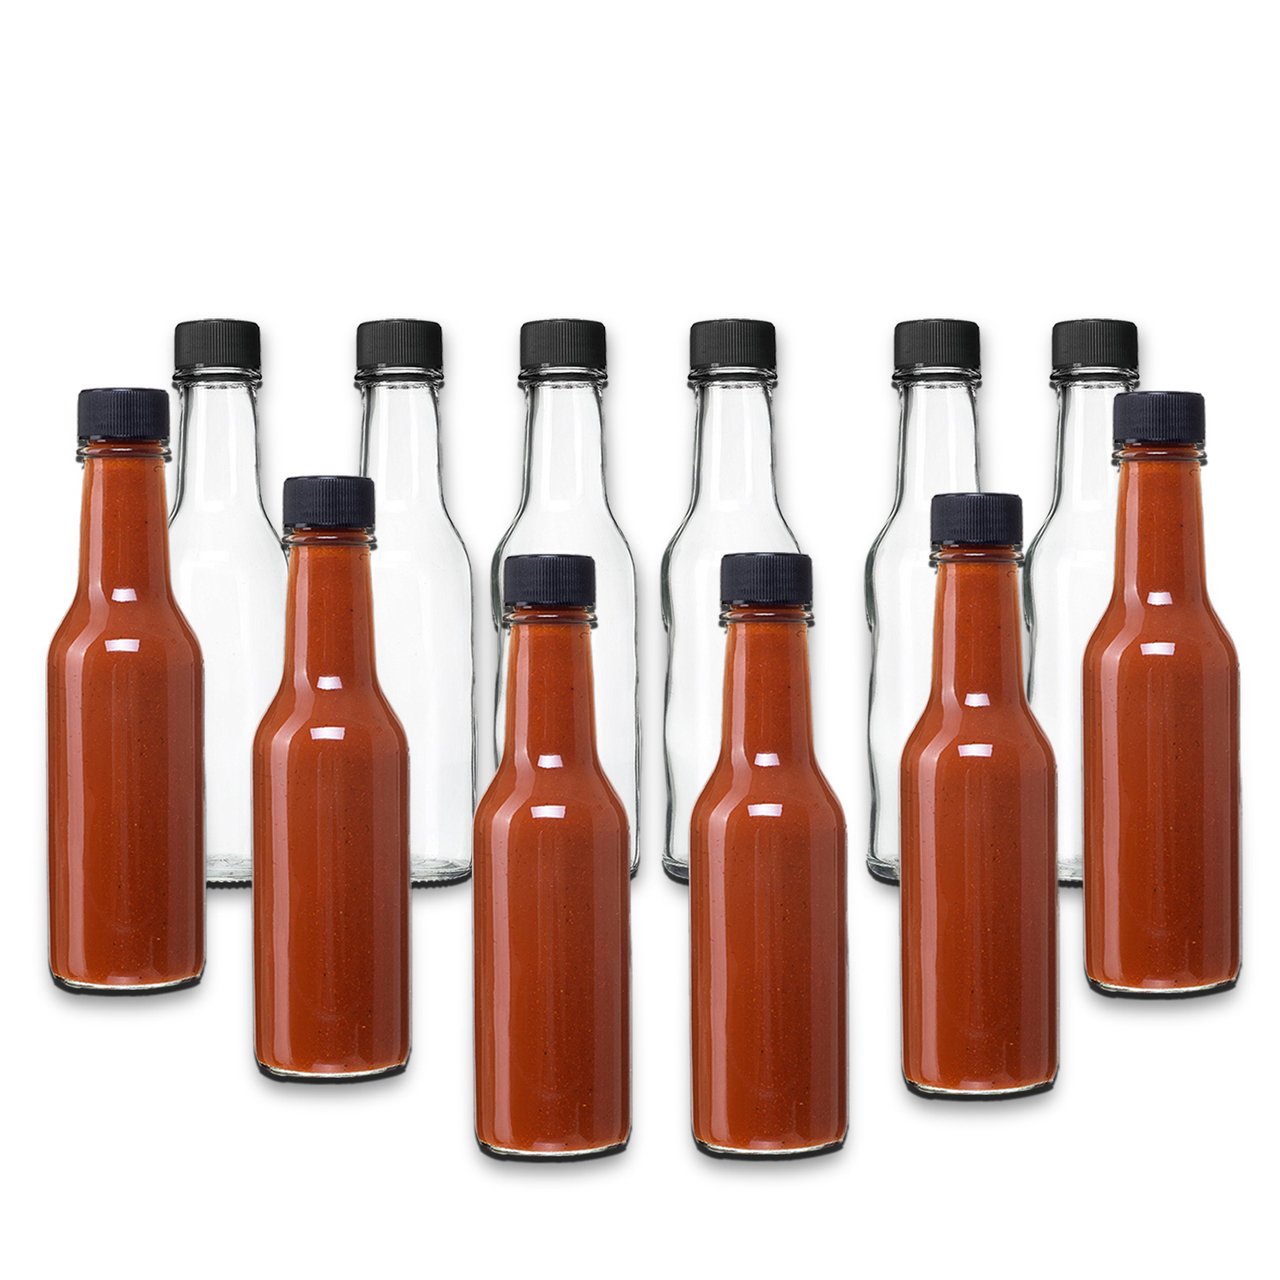 5 oz clear glass woozy sauce bottle with 24